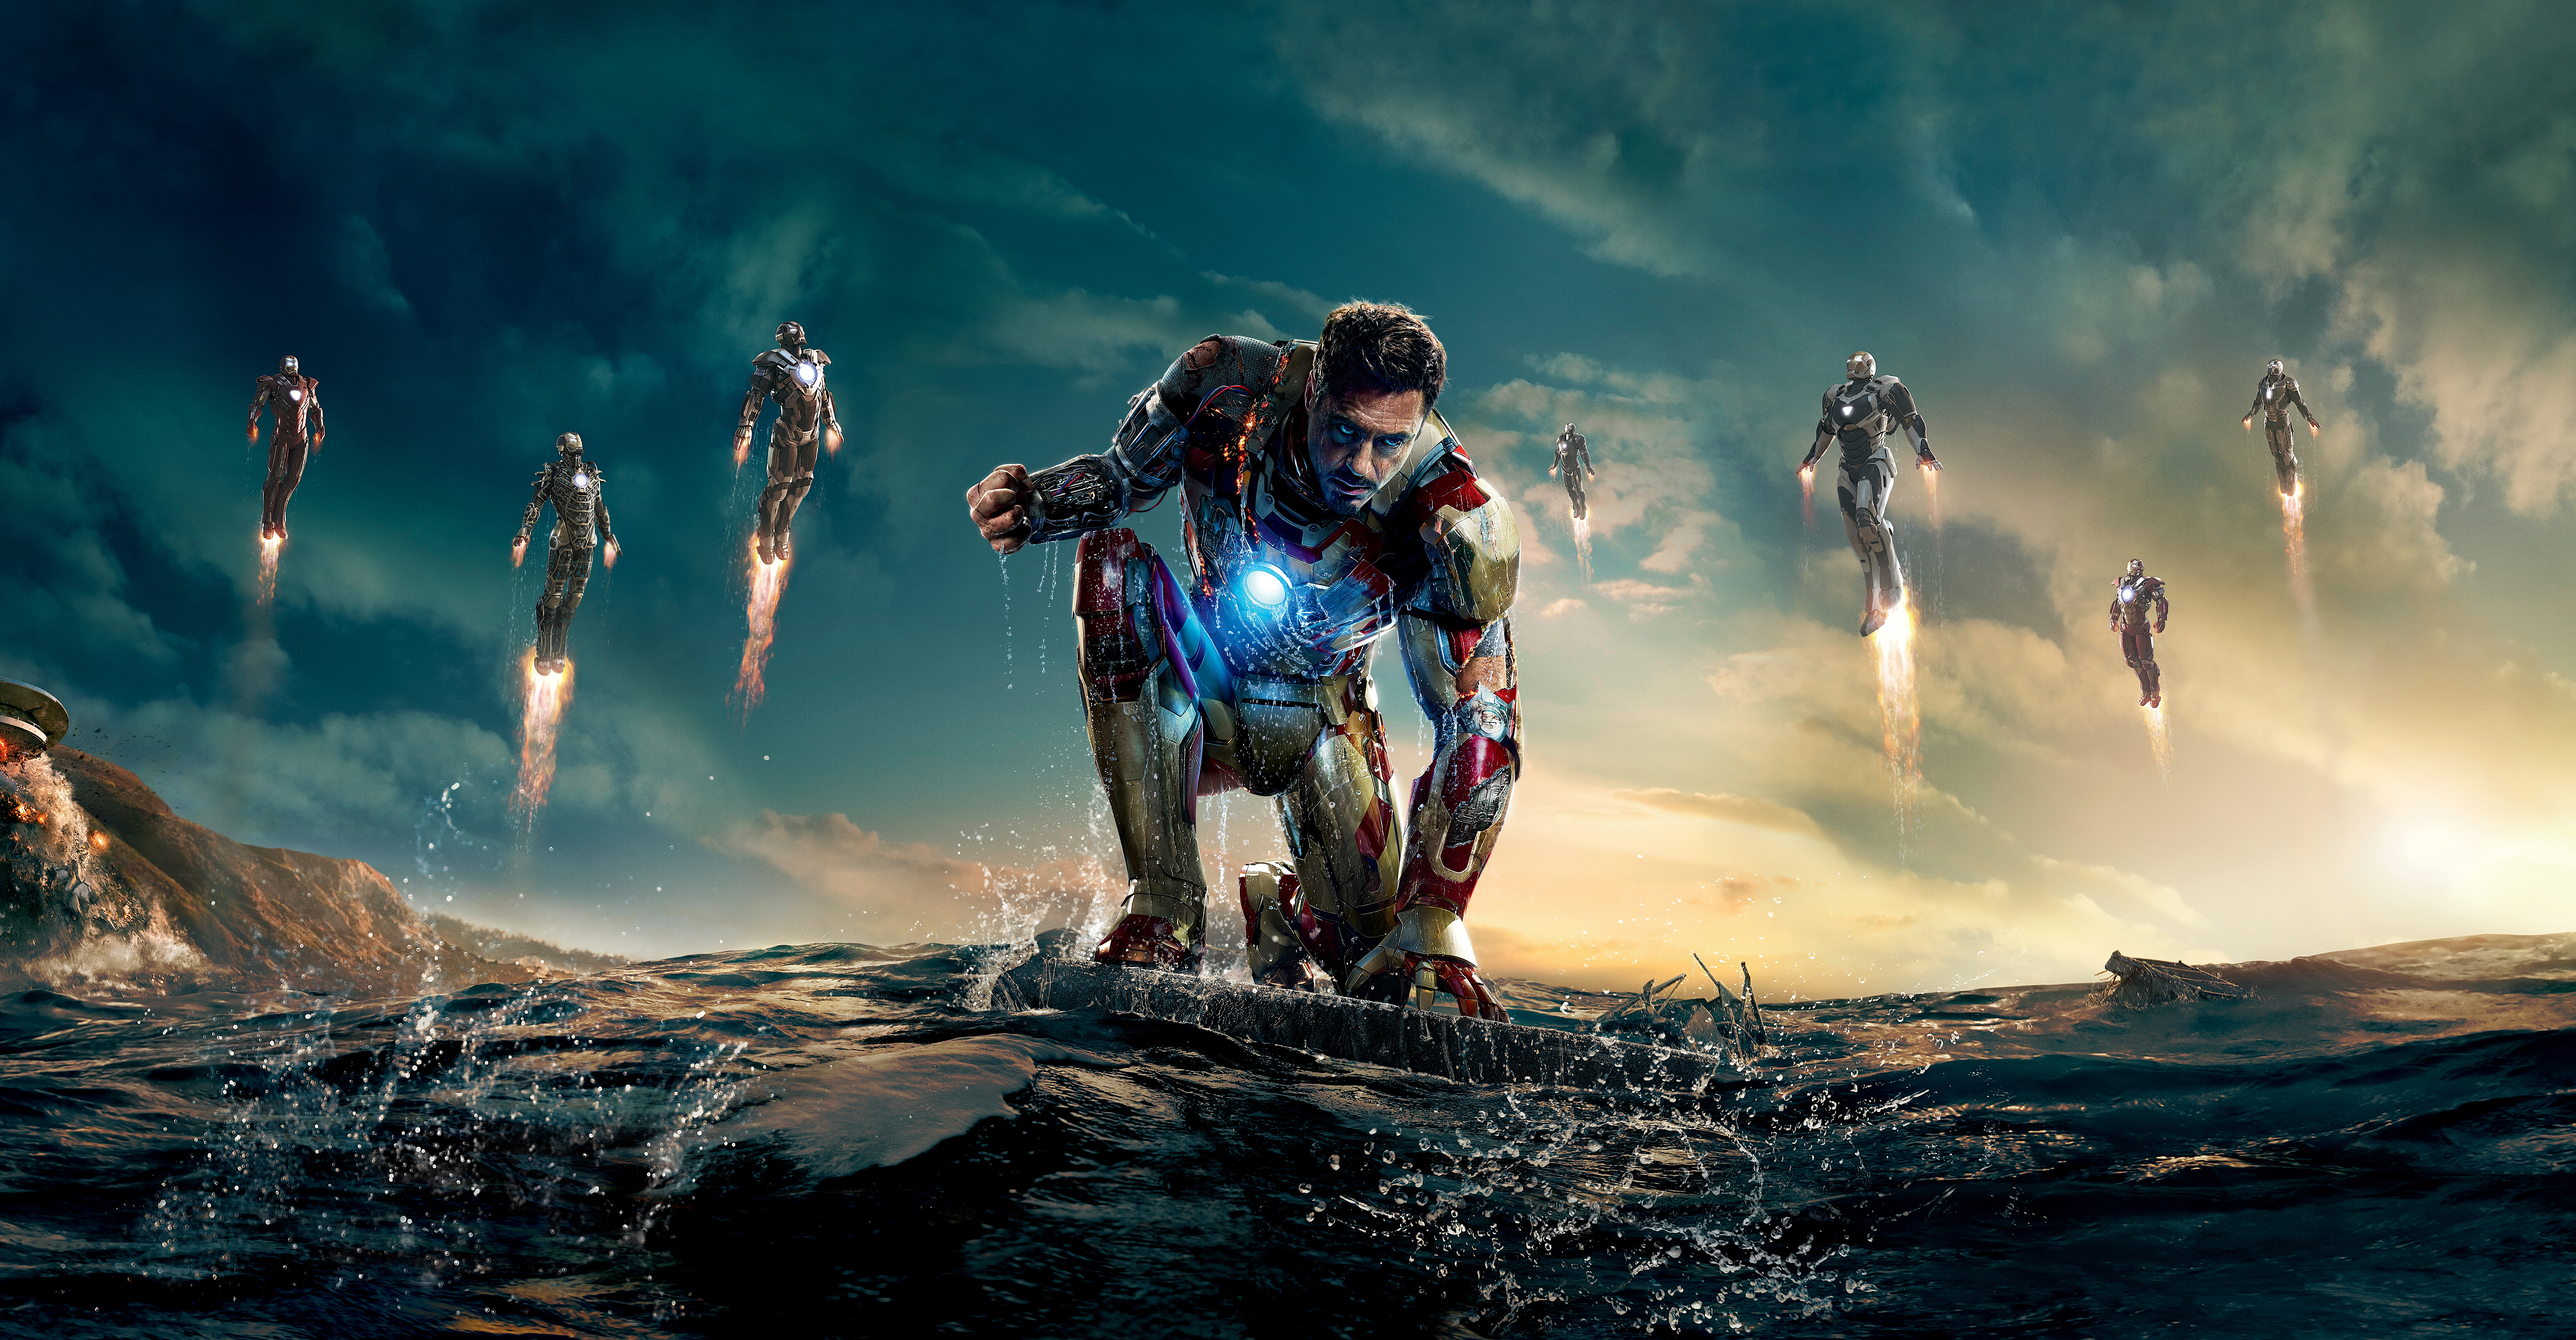 Iron Man 3 Picture